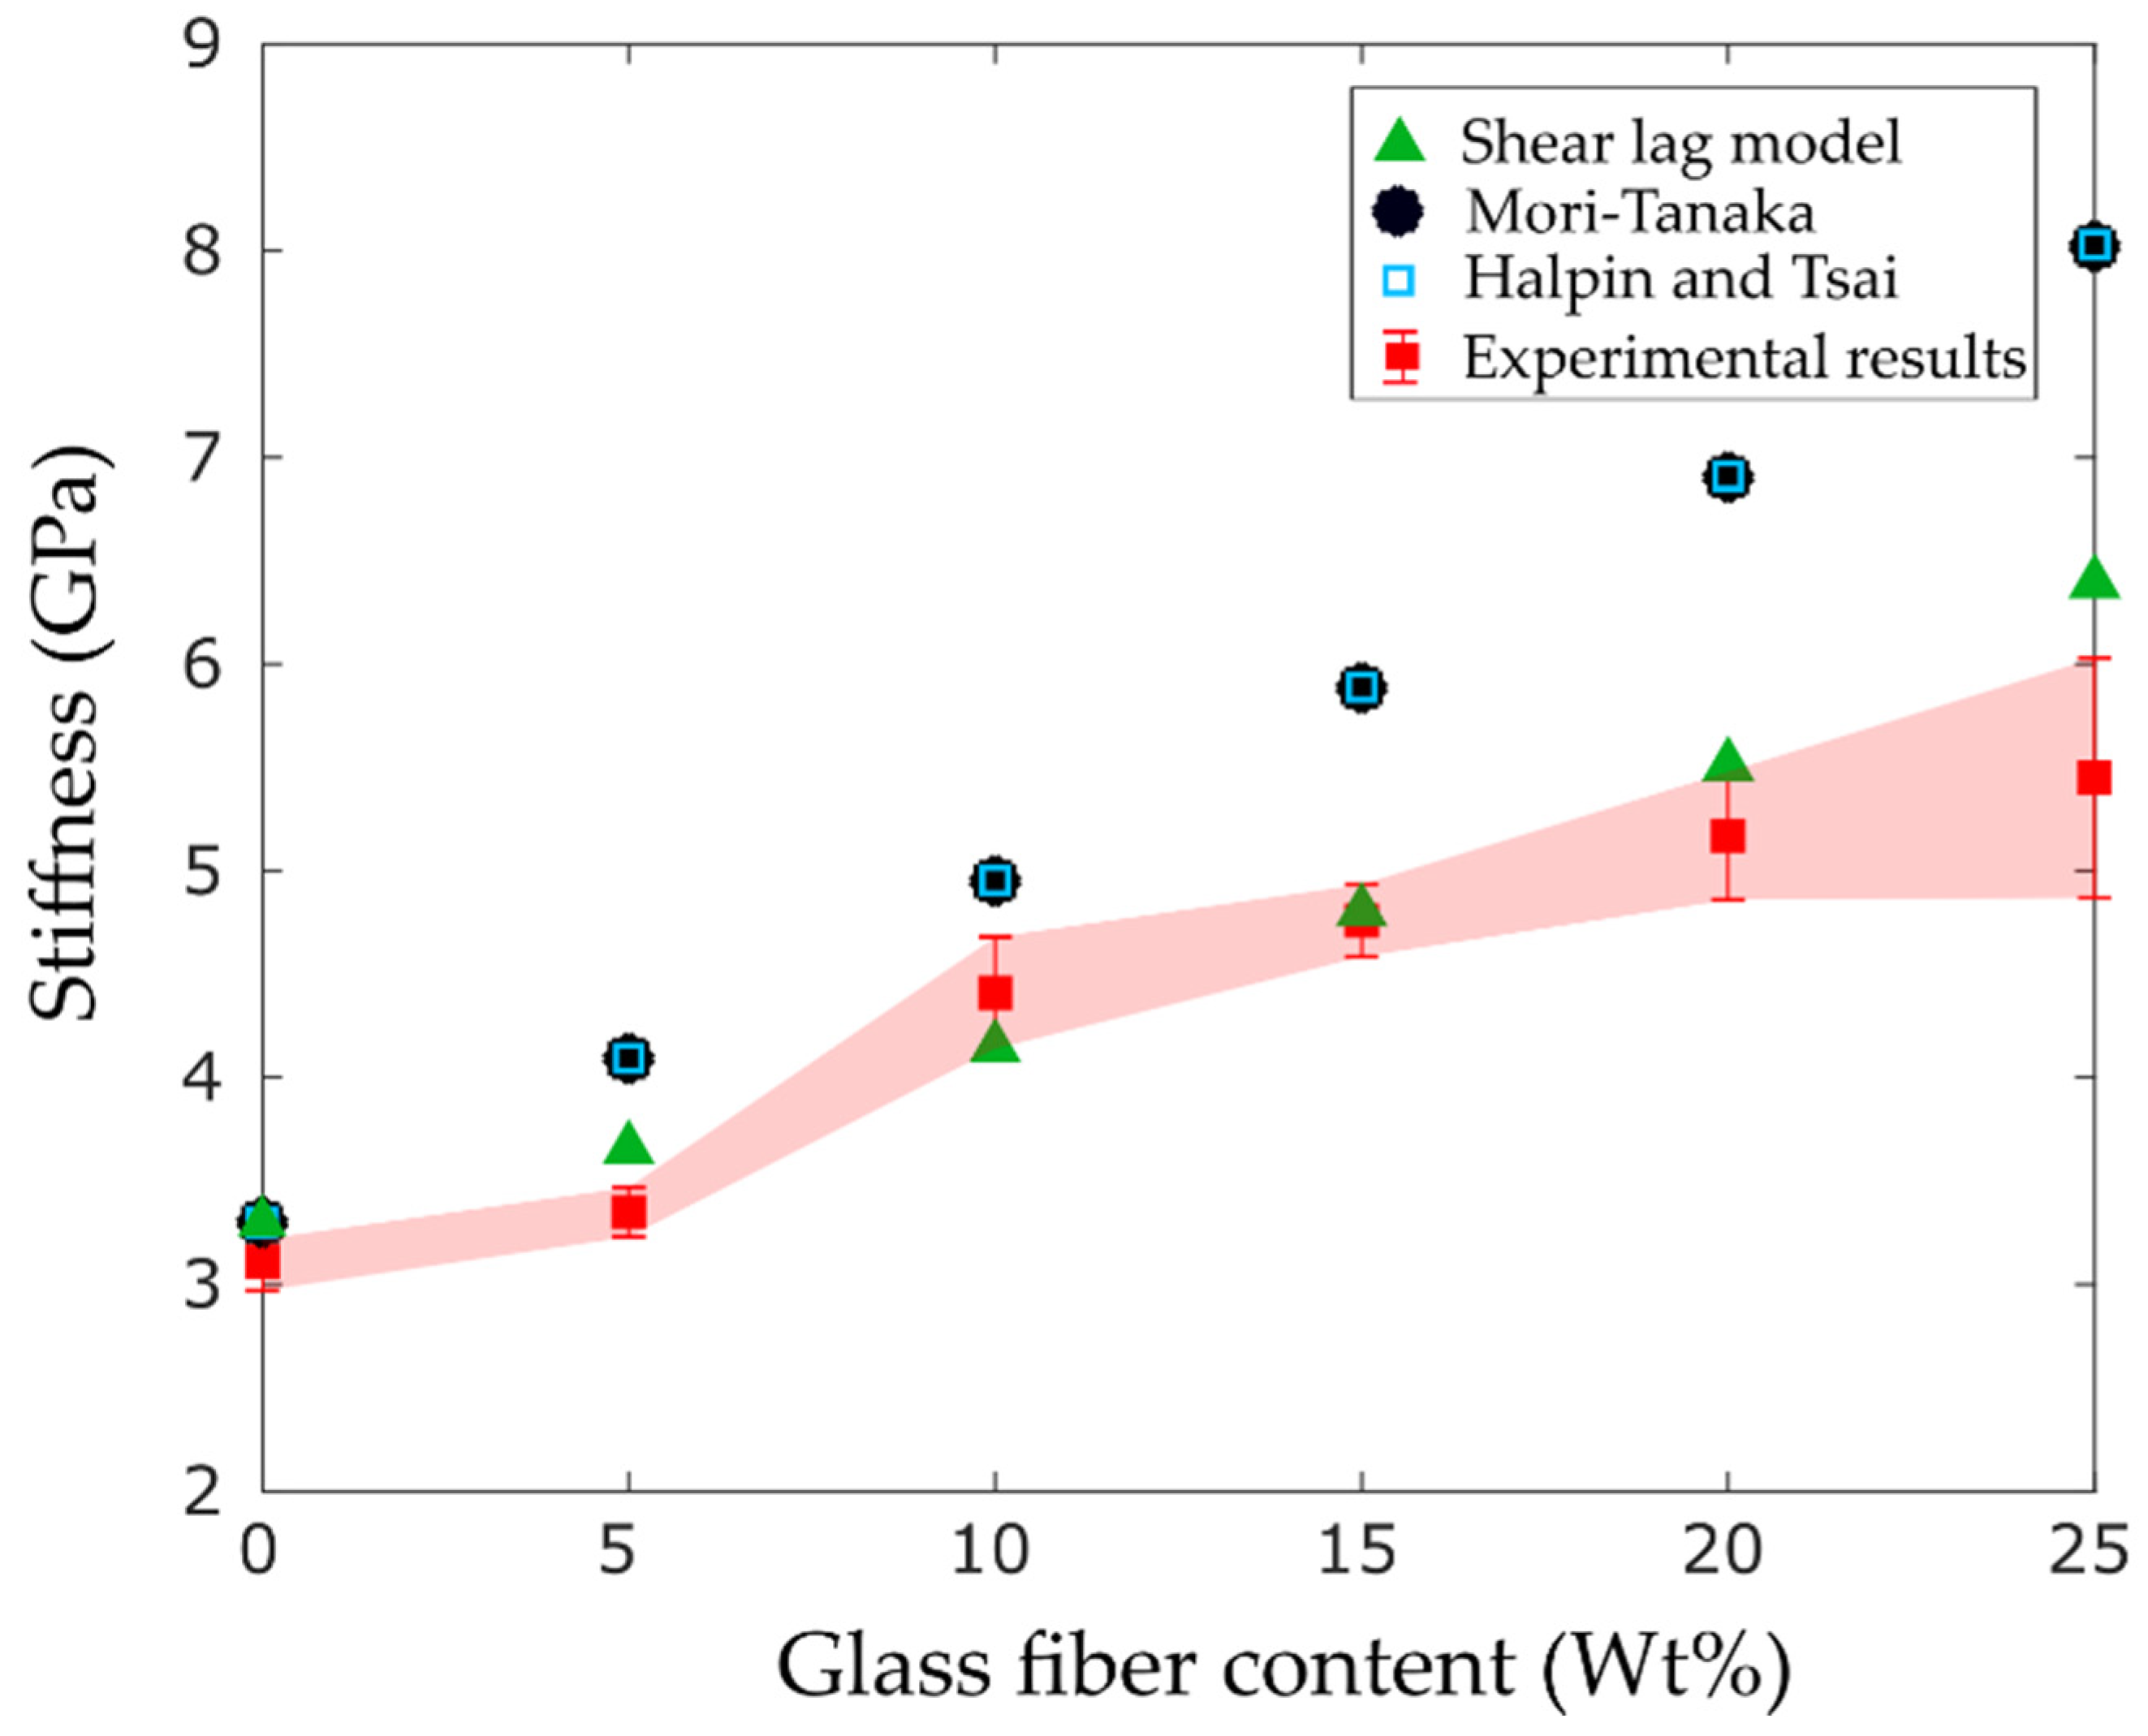 Materials Free Full Text Recycled Glass Fiber Composites From Wind Turbine Waste For 3d Printing Feedstock Effects Of Fiber Content And Interface On Mechanical Performance Html